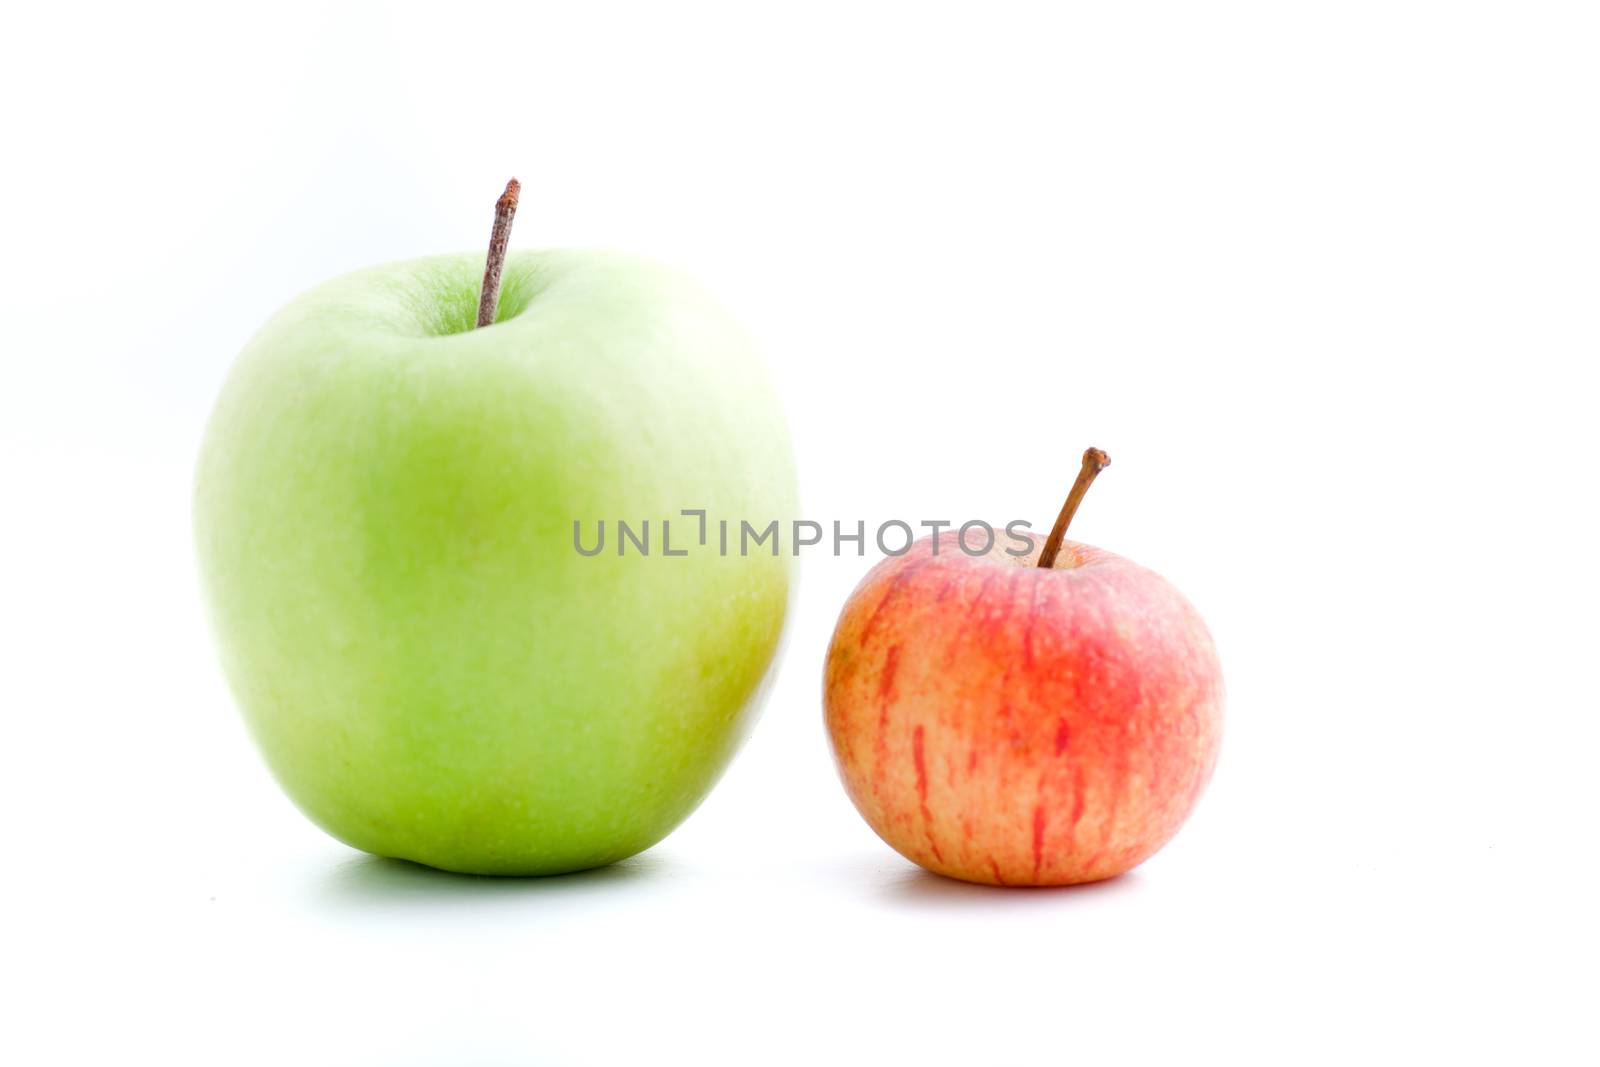 Apple varieties with a large fresh green apple and small red apple standing side by side on a white background with copyspace